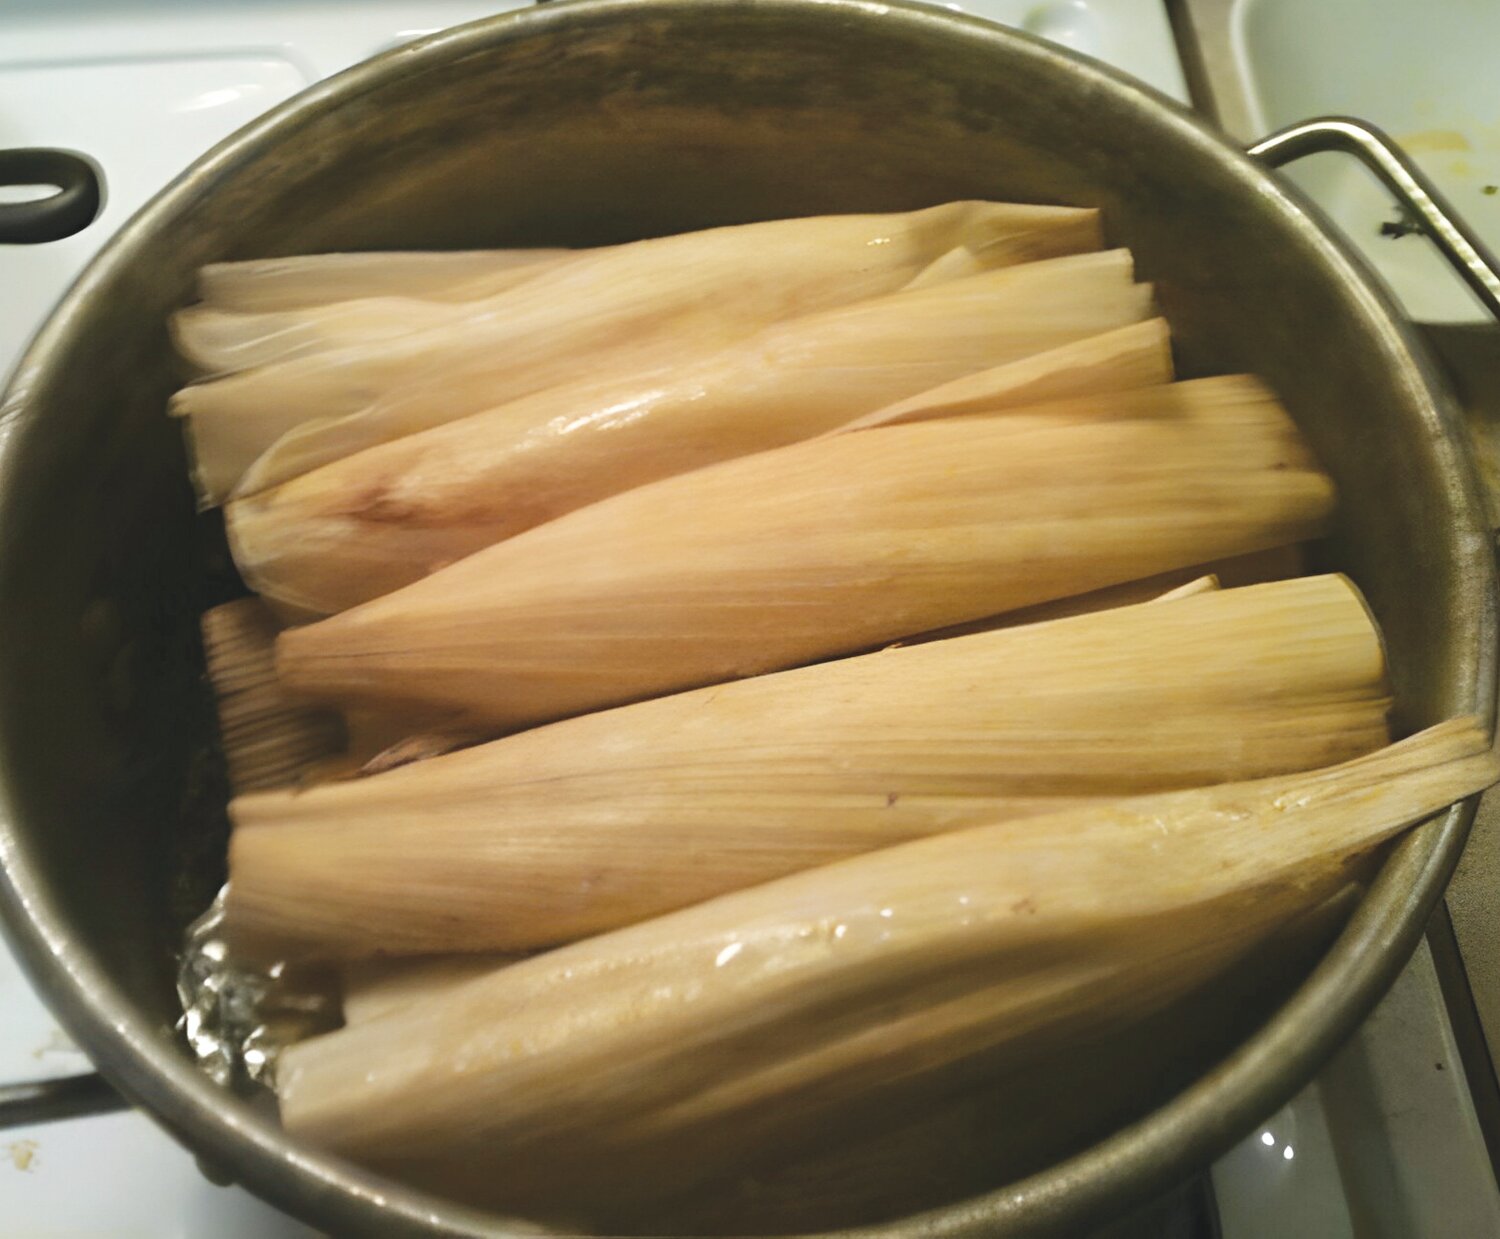 Tamales are a traditional meal at any celebration. They are a good way to bring friends and family together.